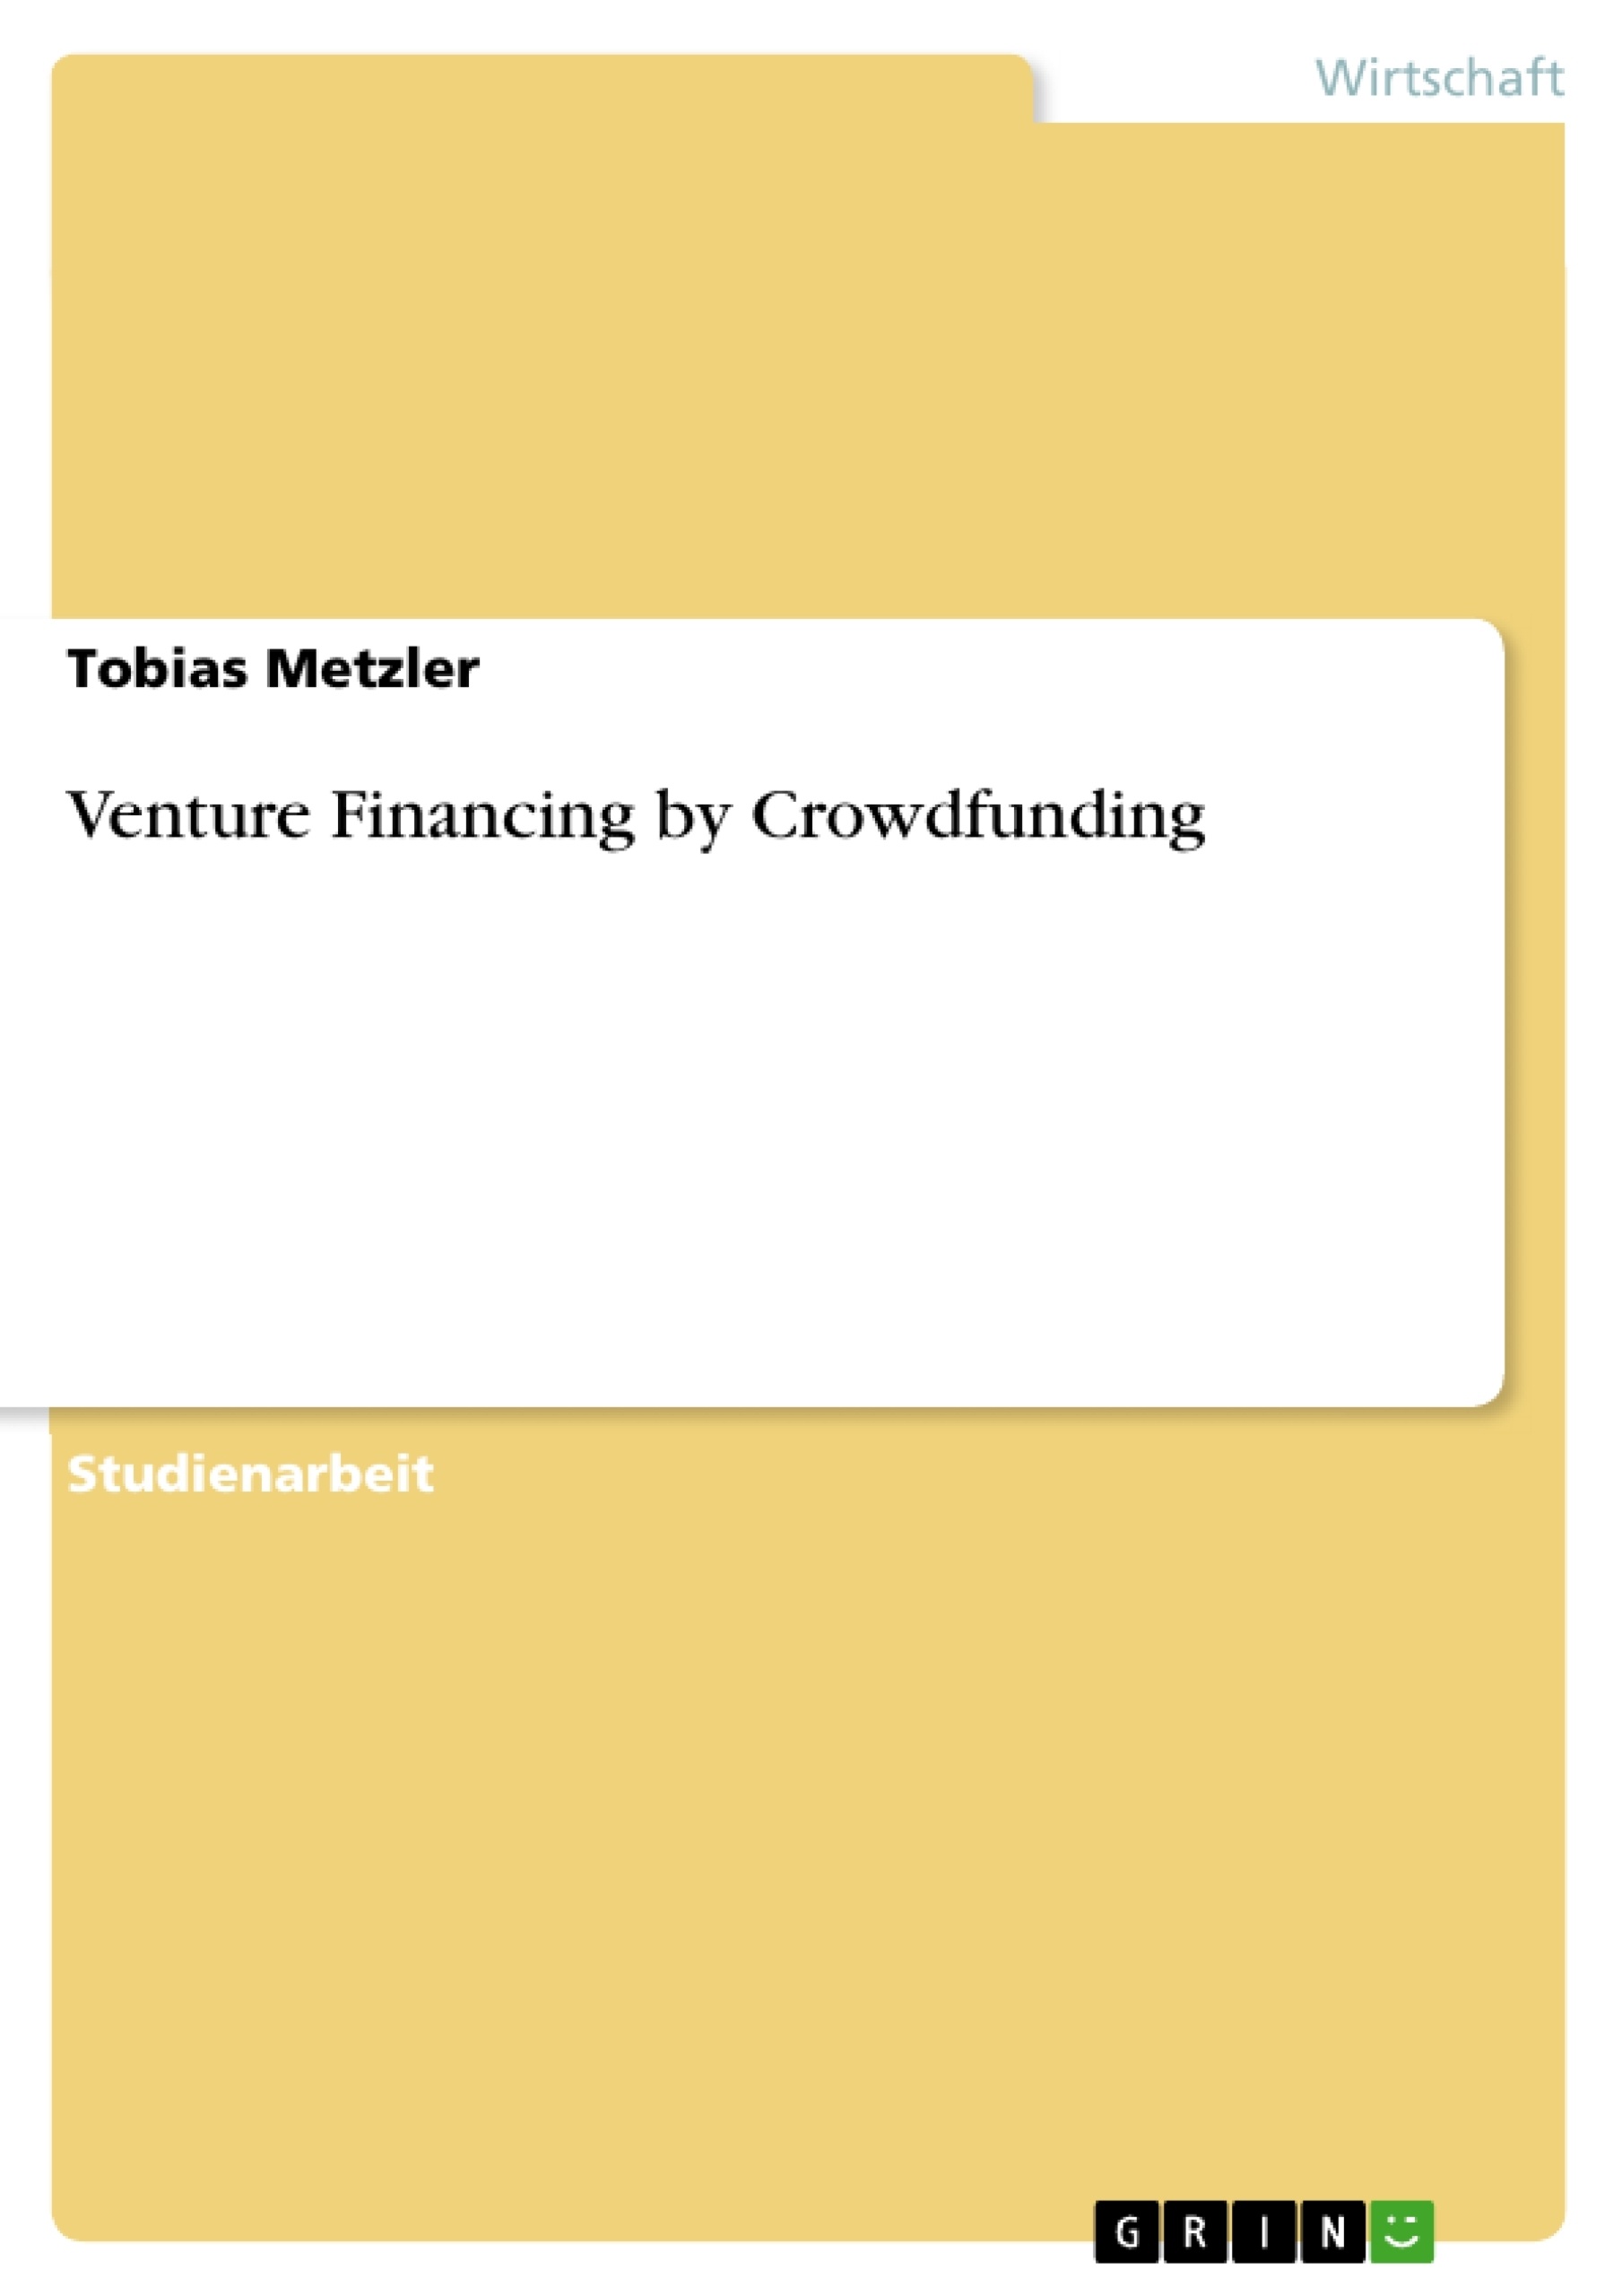 Title: Venture Financing by Crowdfunding